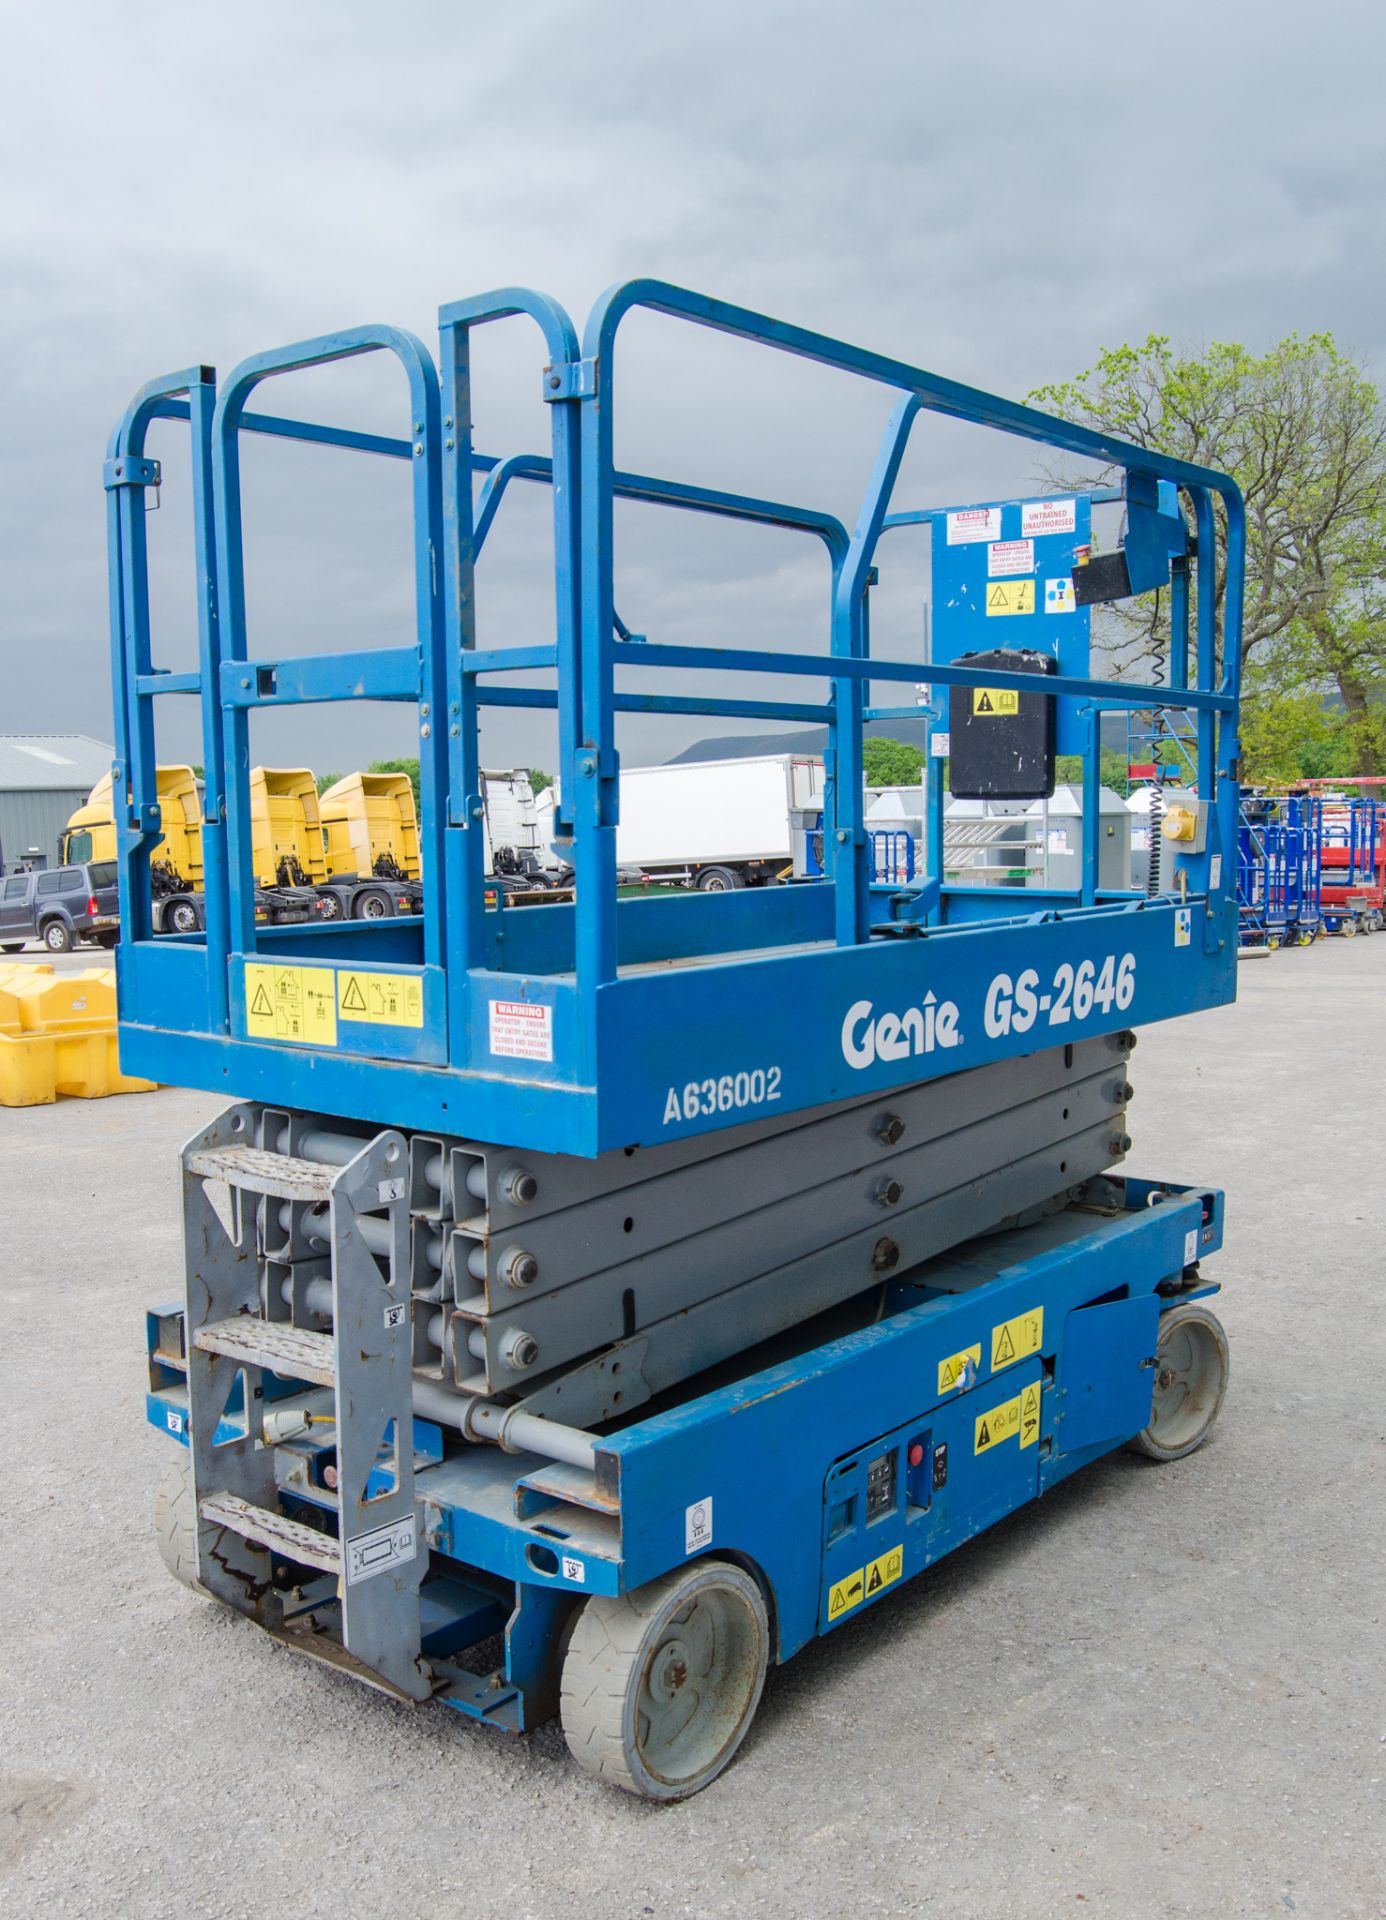 Genie GS2646 battery electric scissor lift access platform Year: 2014 S/N: 12178 Recorded Hours: 151